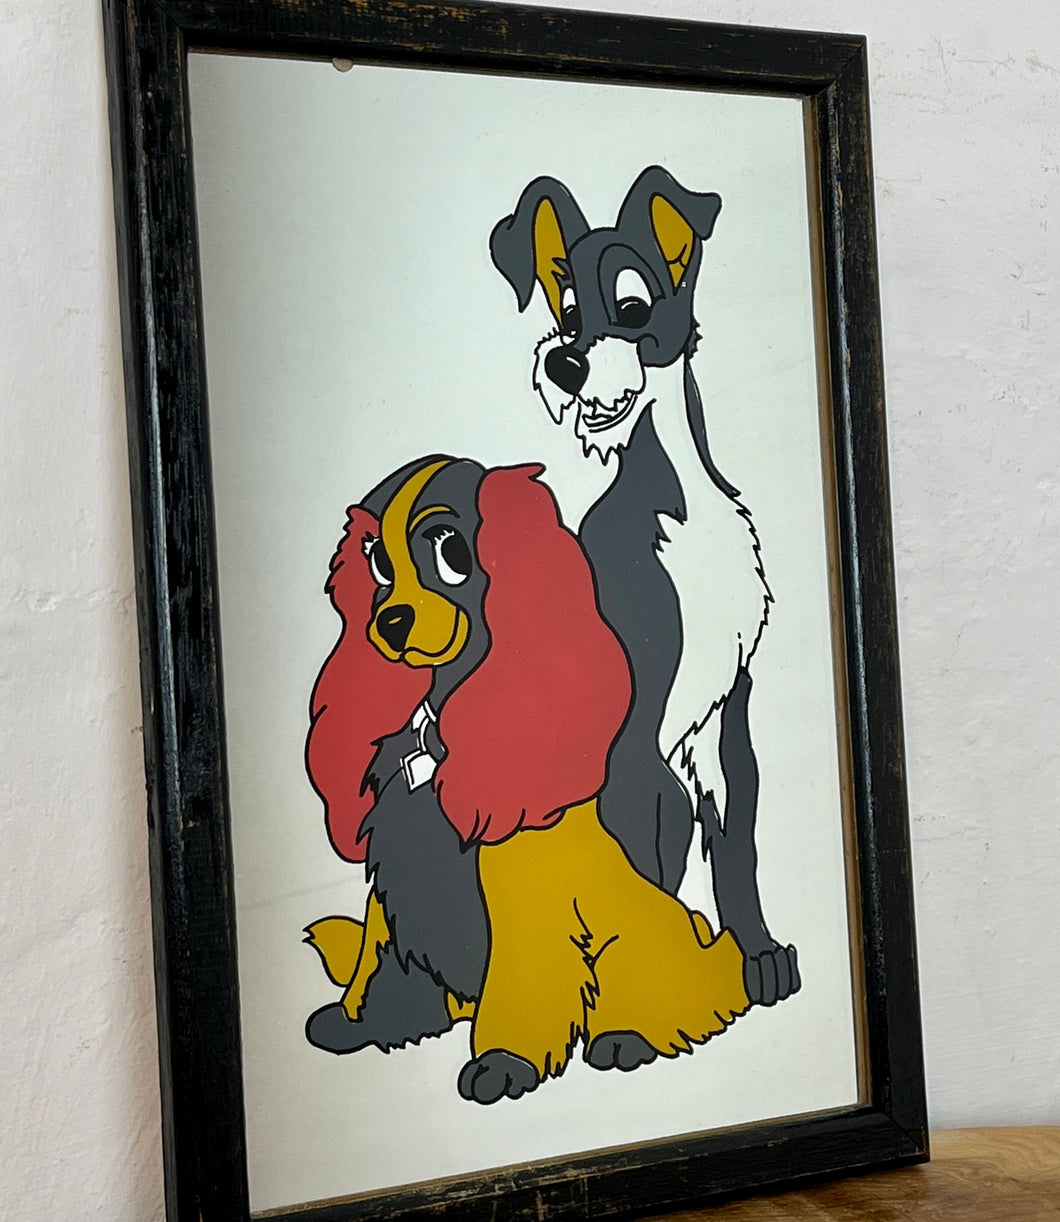 Wonderful Disney mirror with vibrant colours displays the magical cheerful lady and the tramp characters to make an excellent addition to a children's play room.